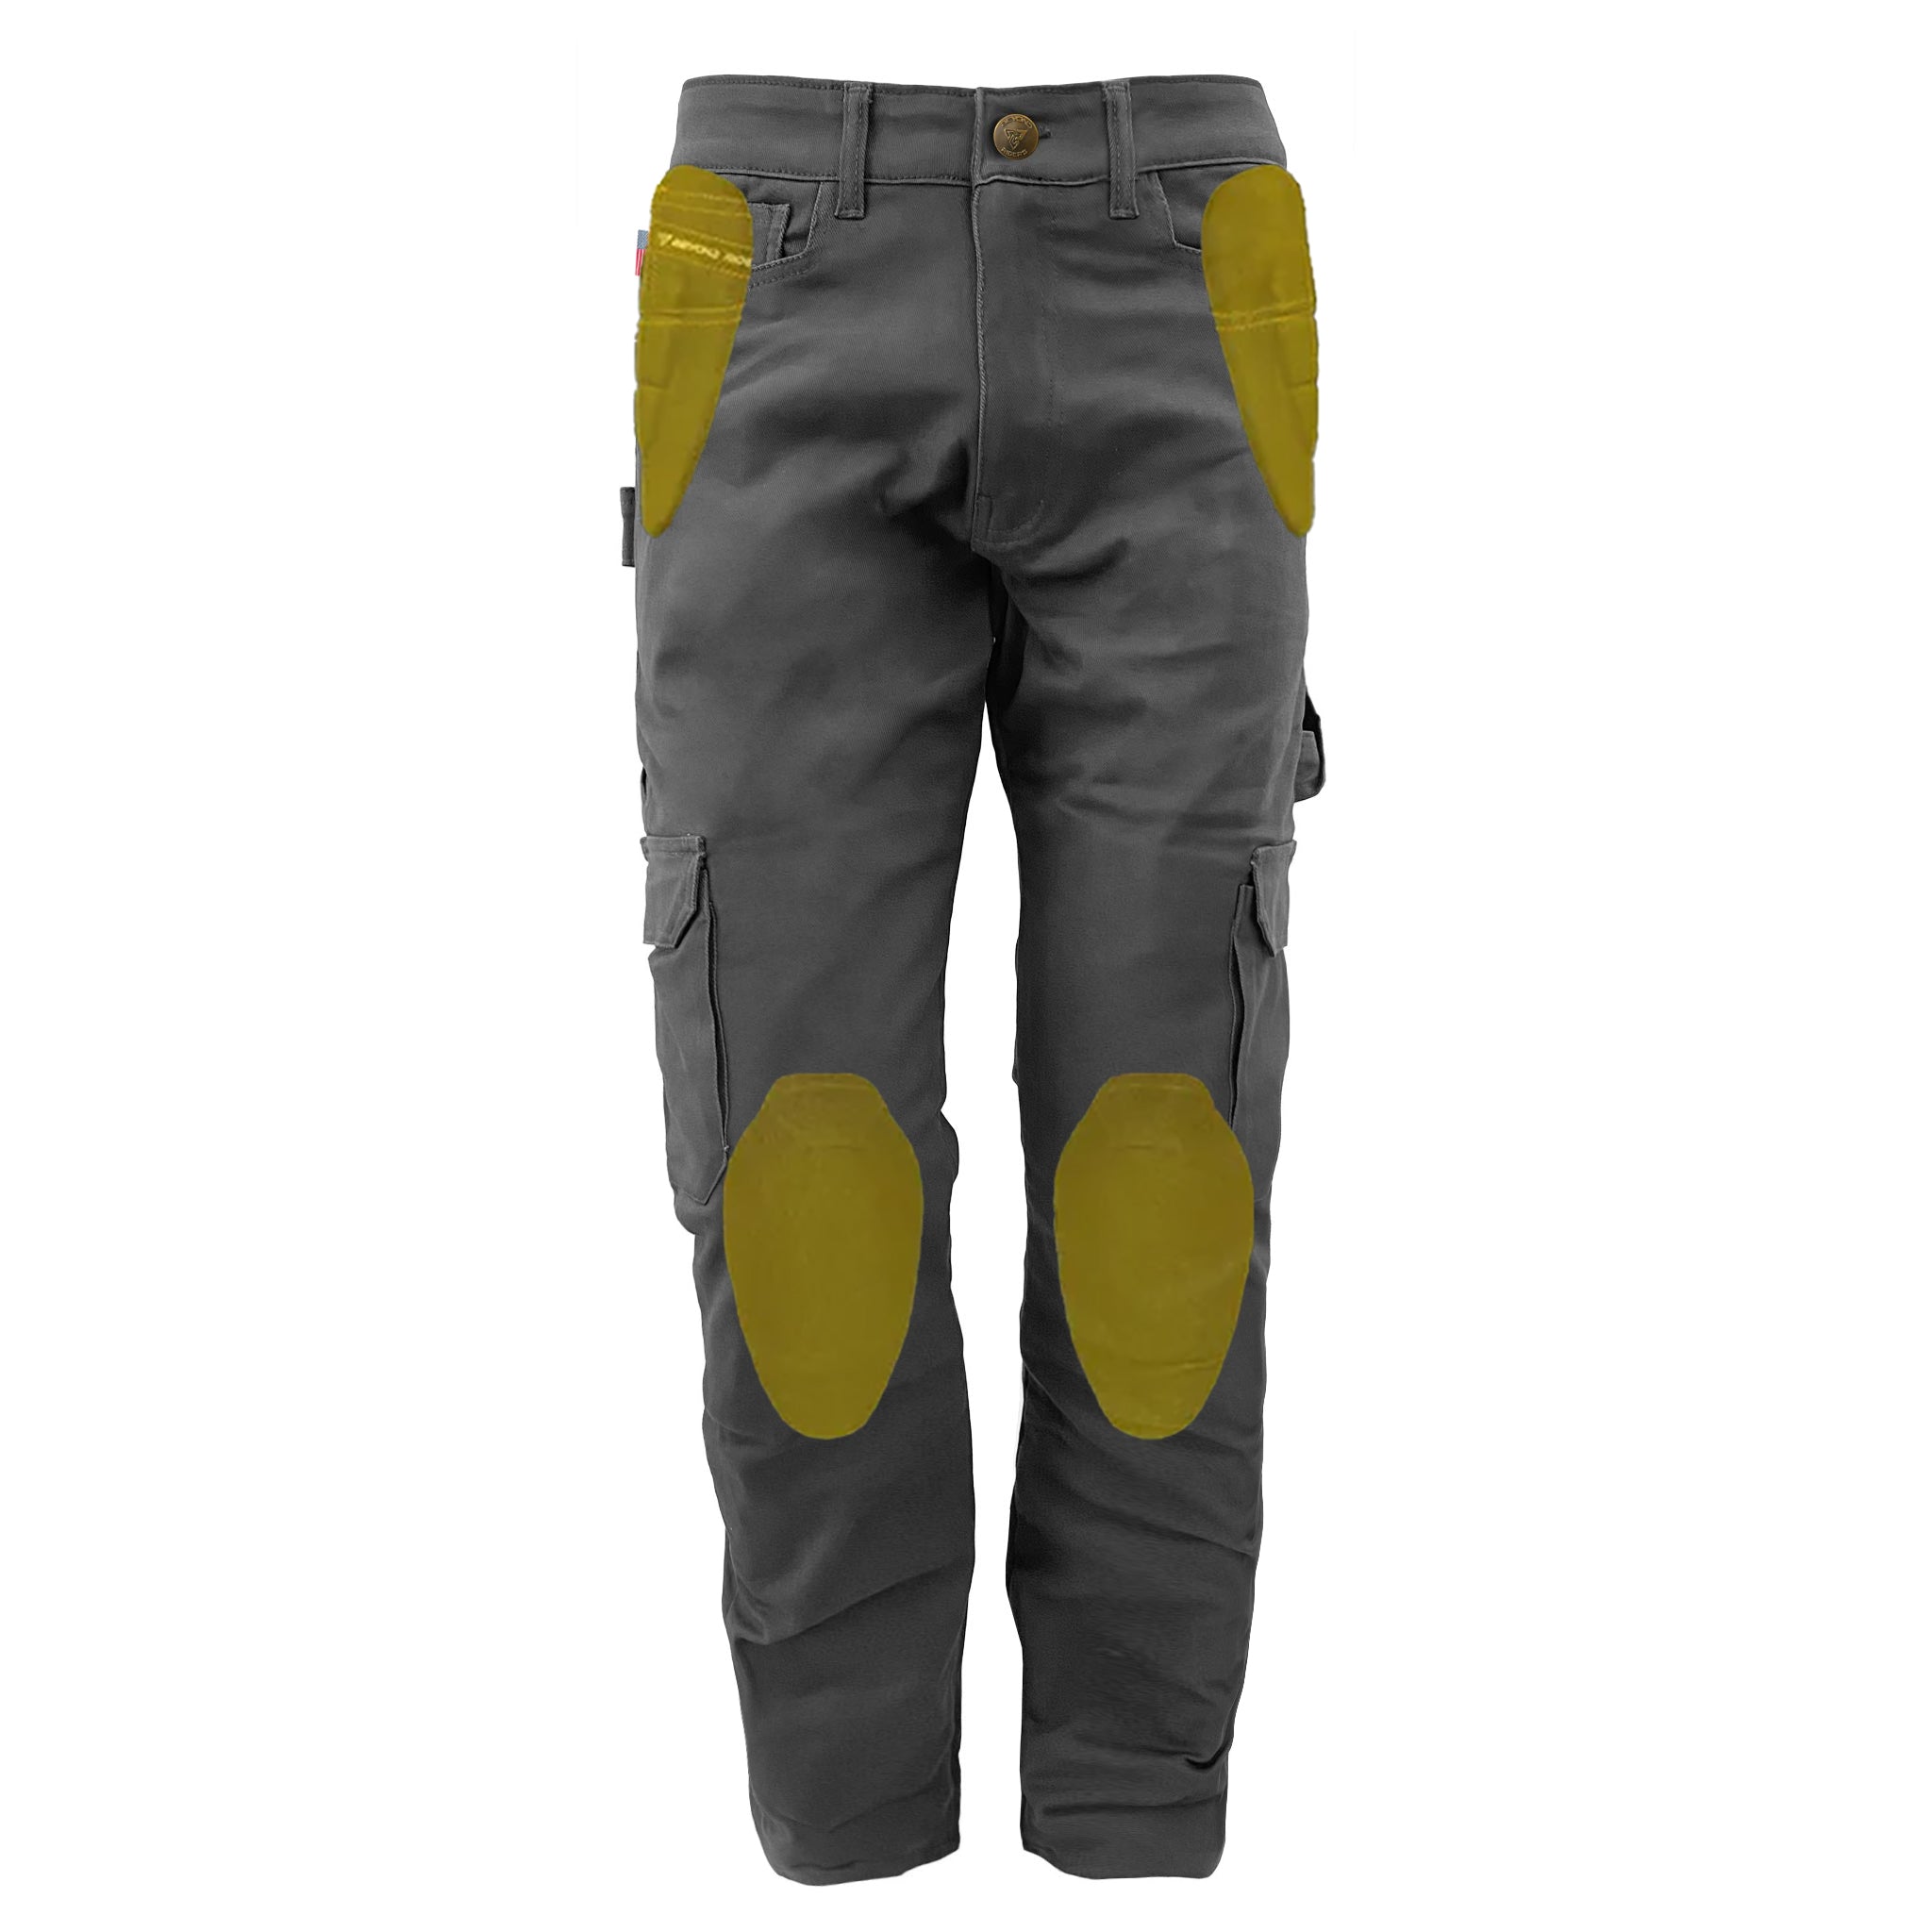 Relaxed Fit Cargo Pants - Gray